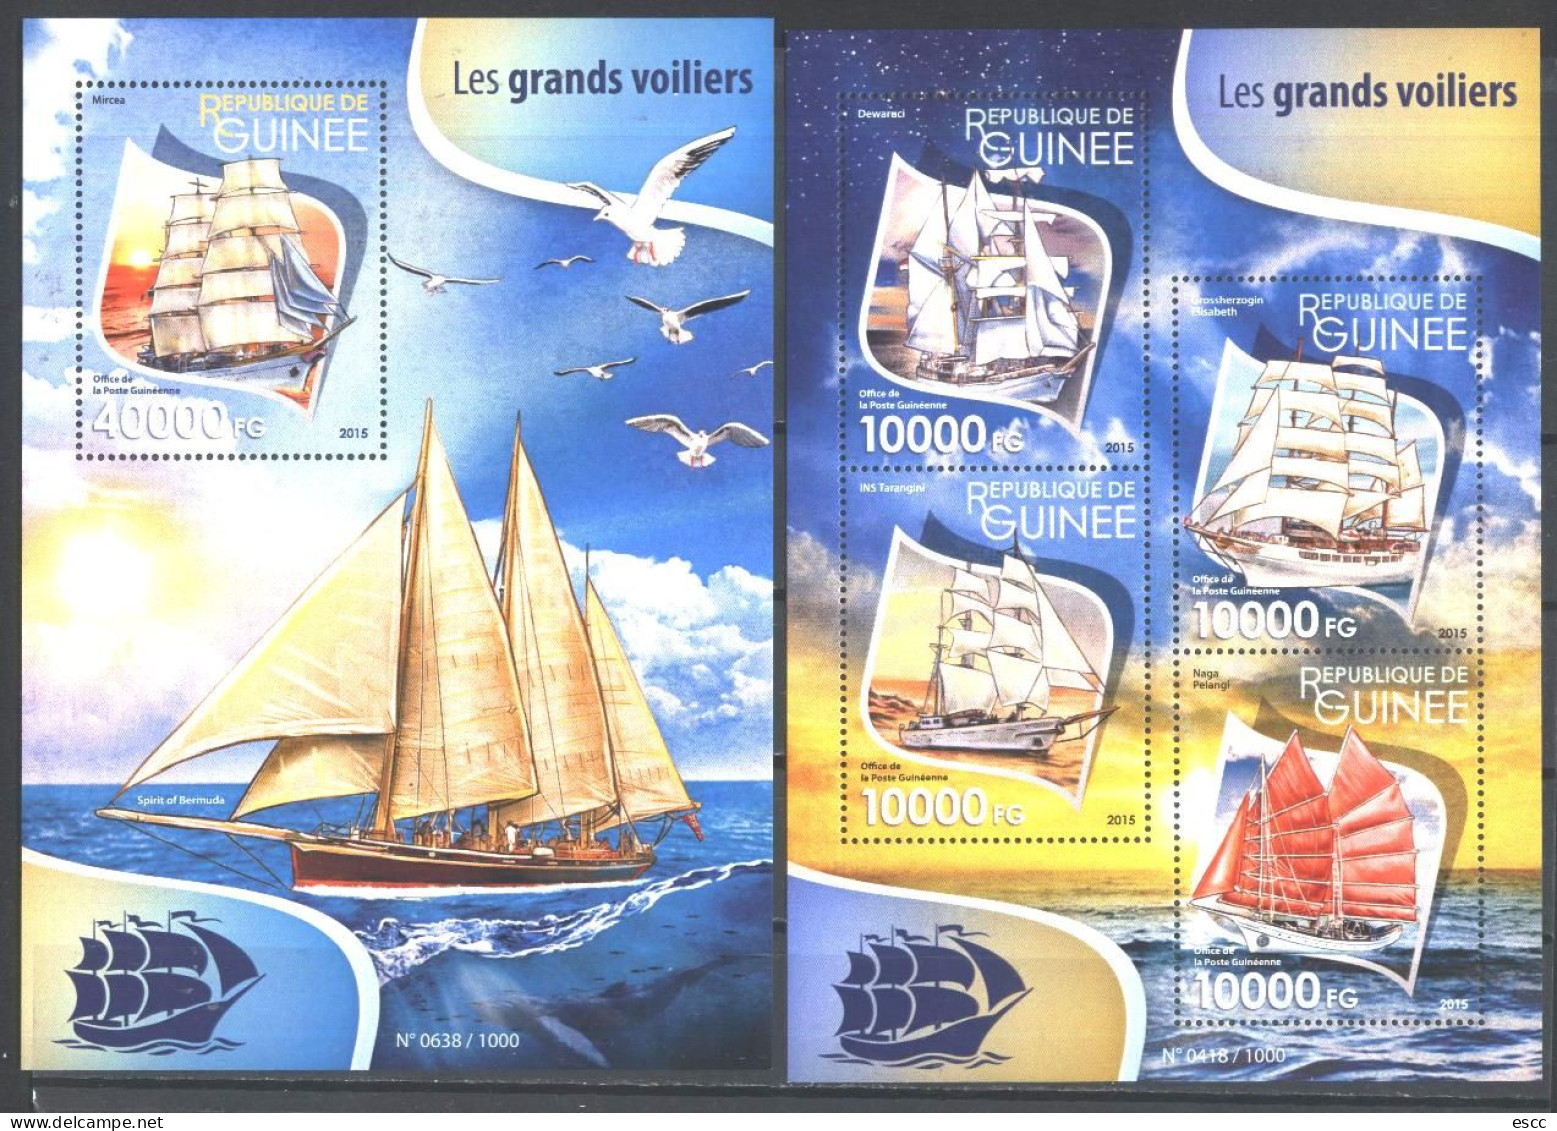 Mint Stamps In Miniature Sheet Abd S/S Ships  2015  From Guinea - Ships